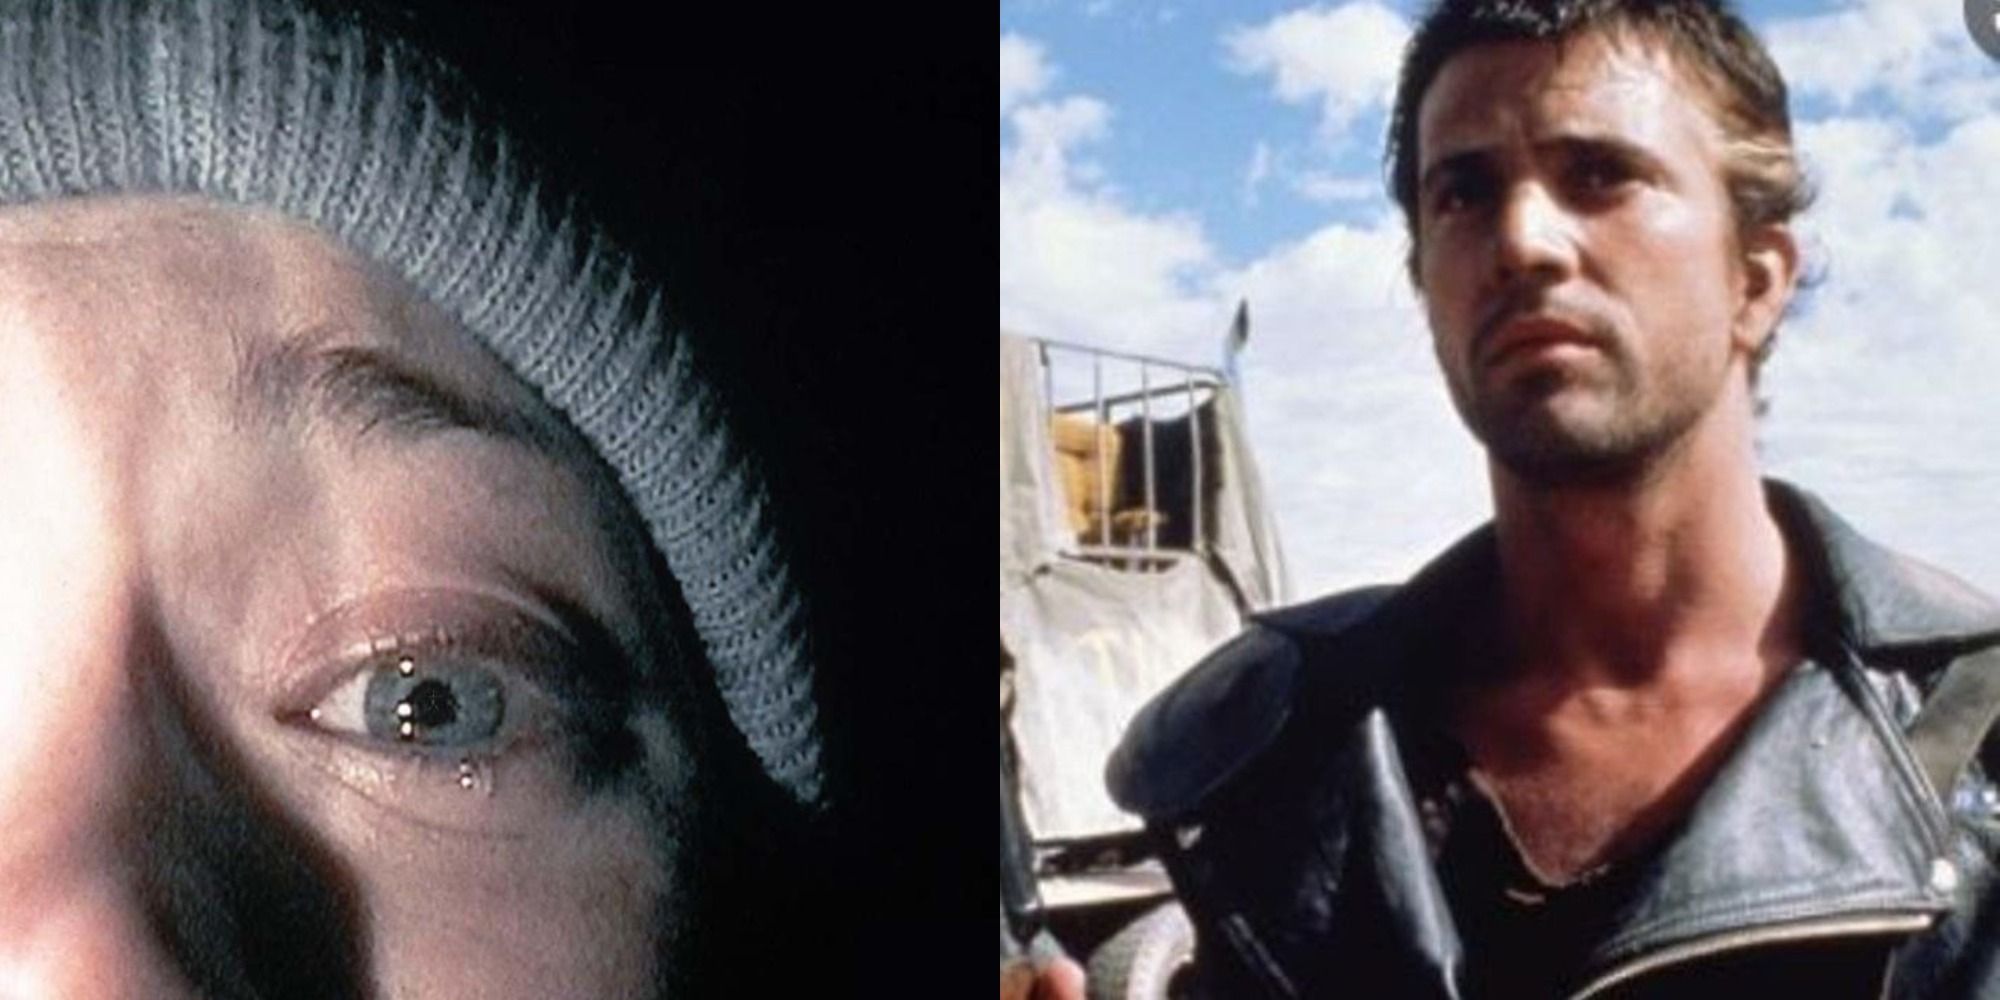 Two side by side images from Blair Witch Project and Mad Max